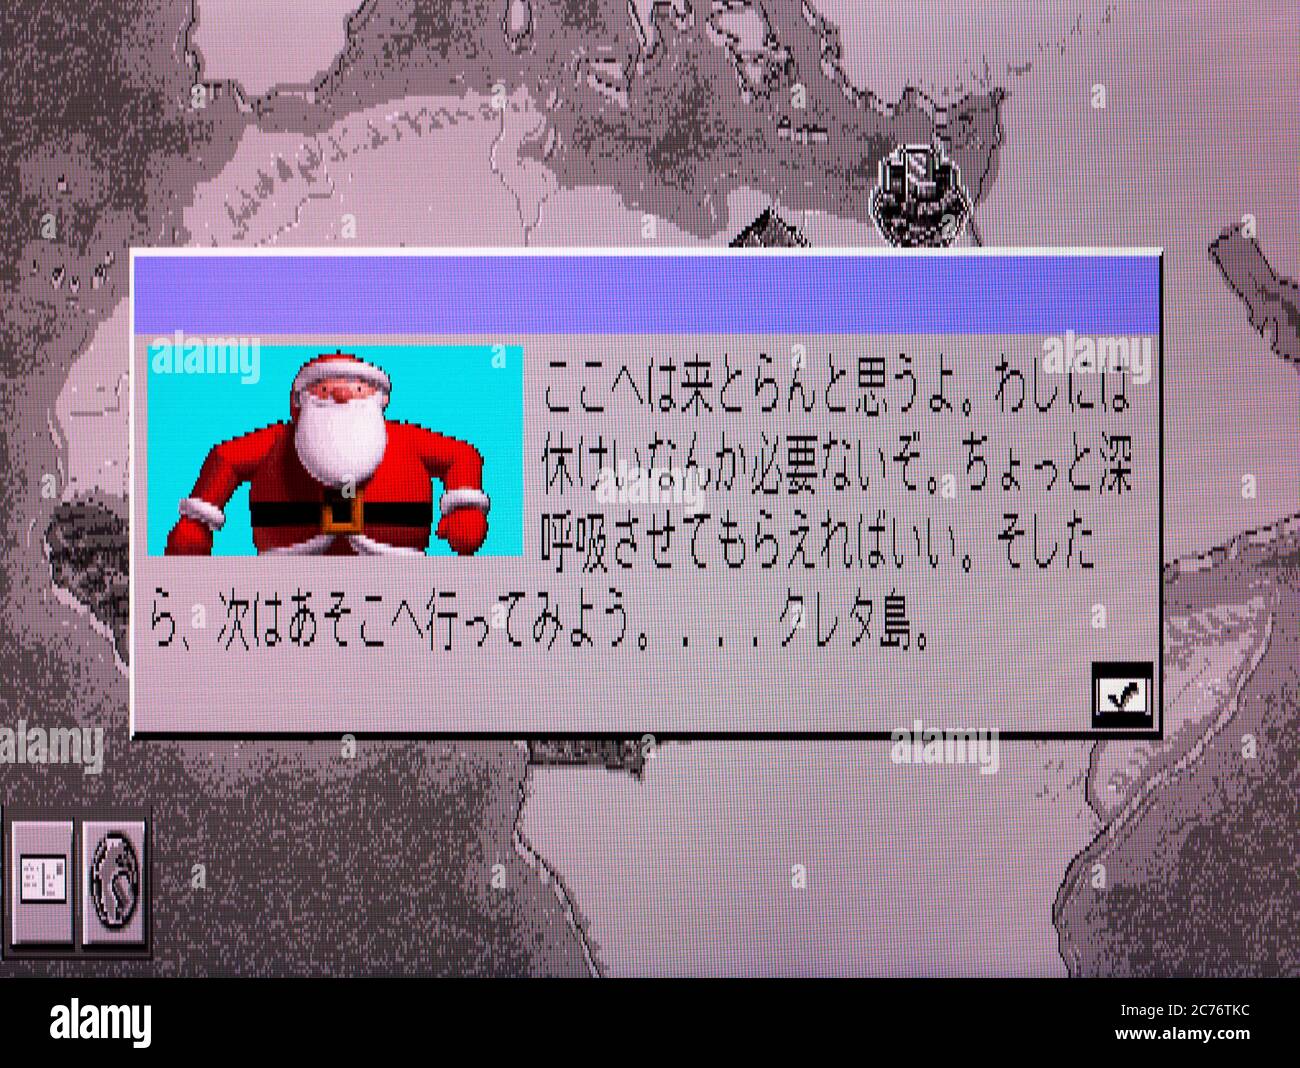 Father Christmas by Raymond Briggs - Sega Saturn Videogame - Editorial use only Stock Photo